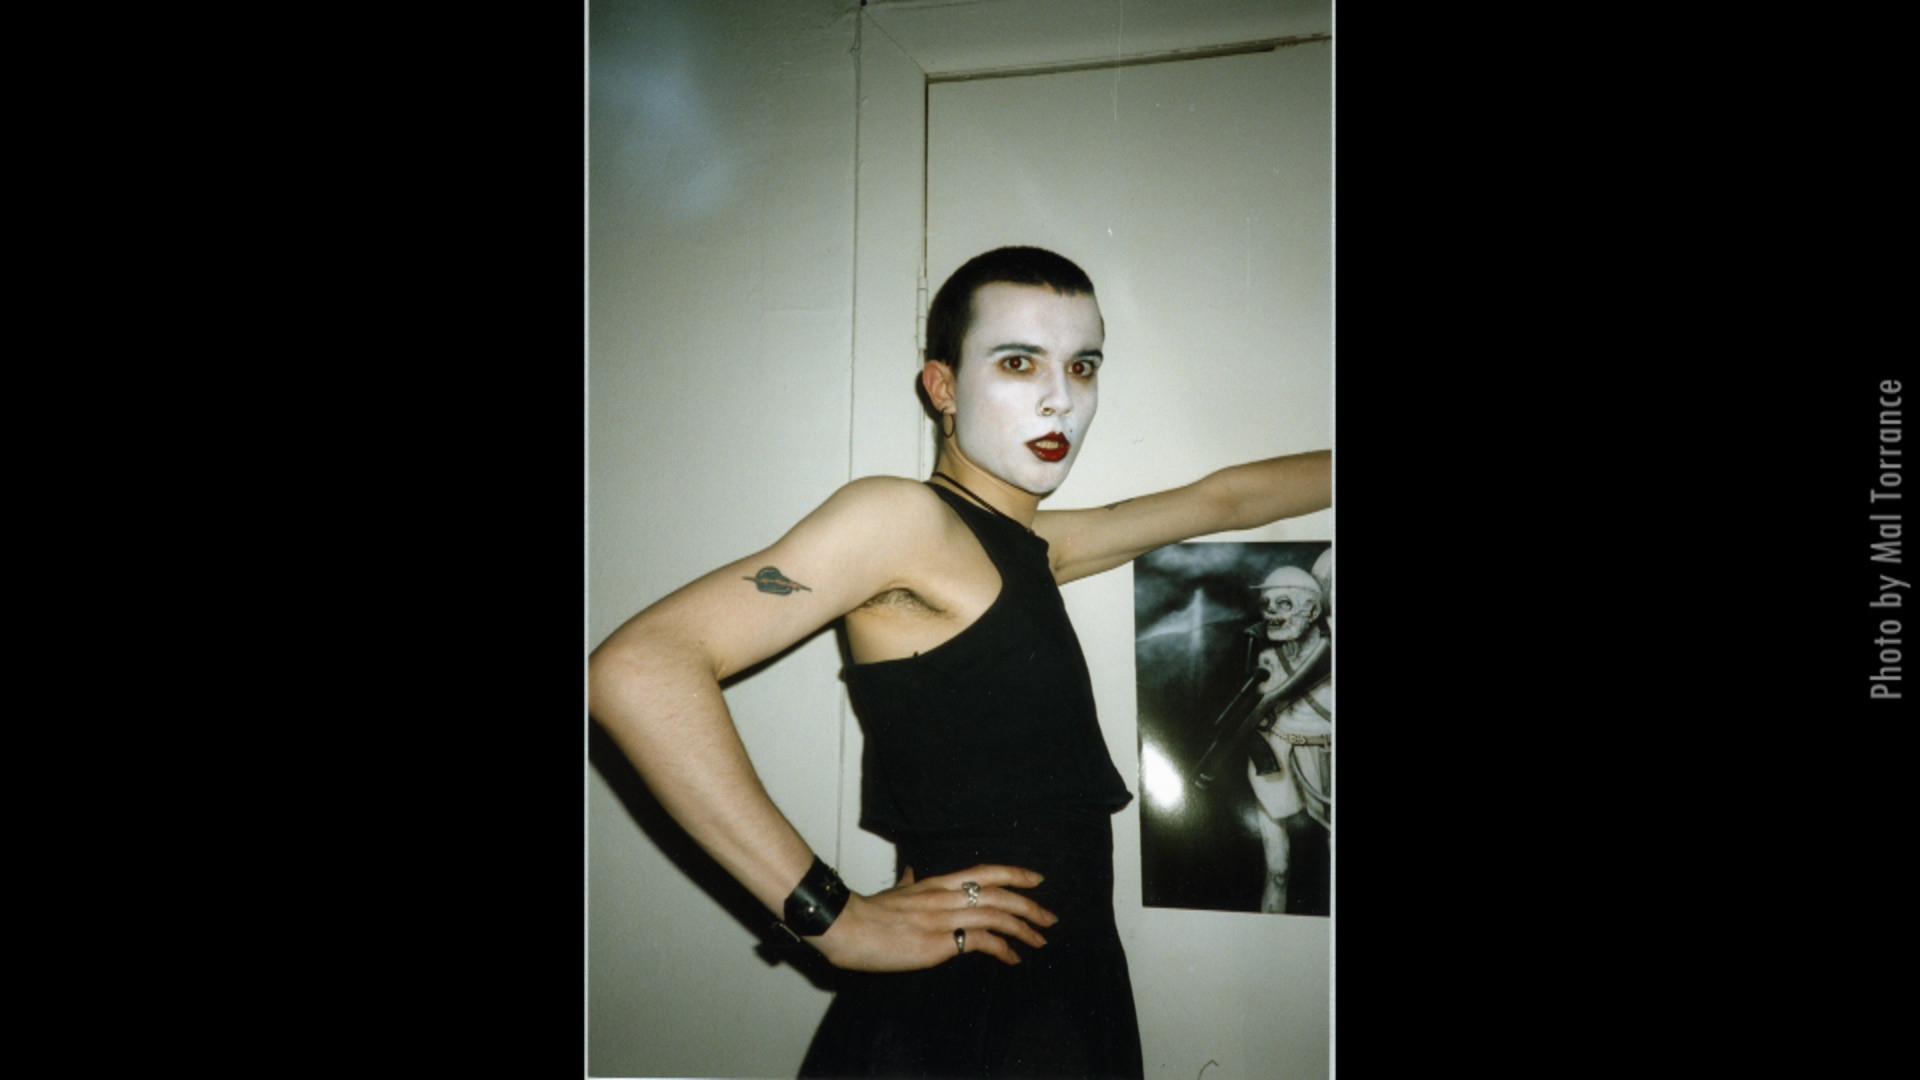 Rohan Quine - 'Those New York 'Nineties' - photo (386) by Mal Torrance